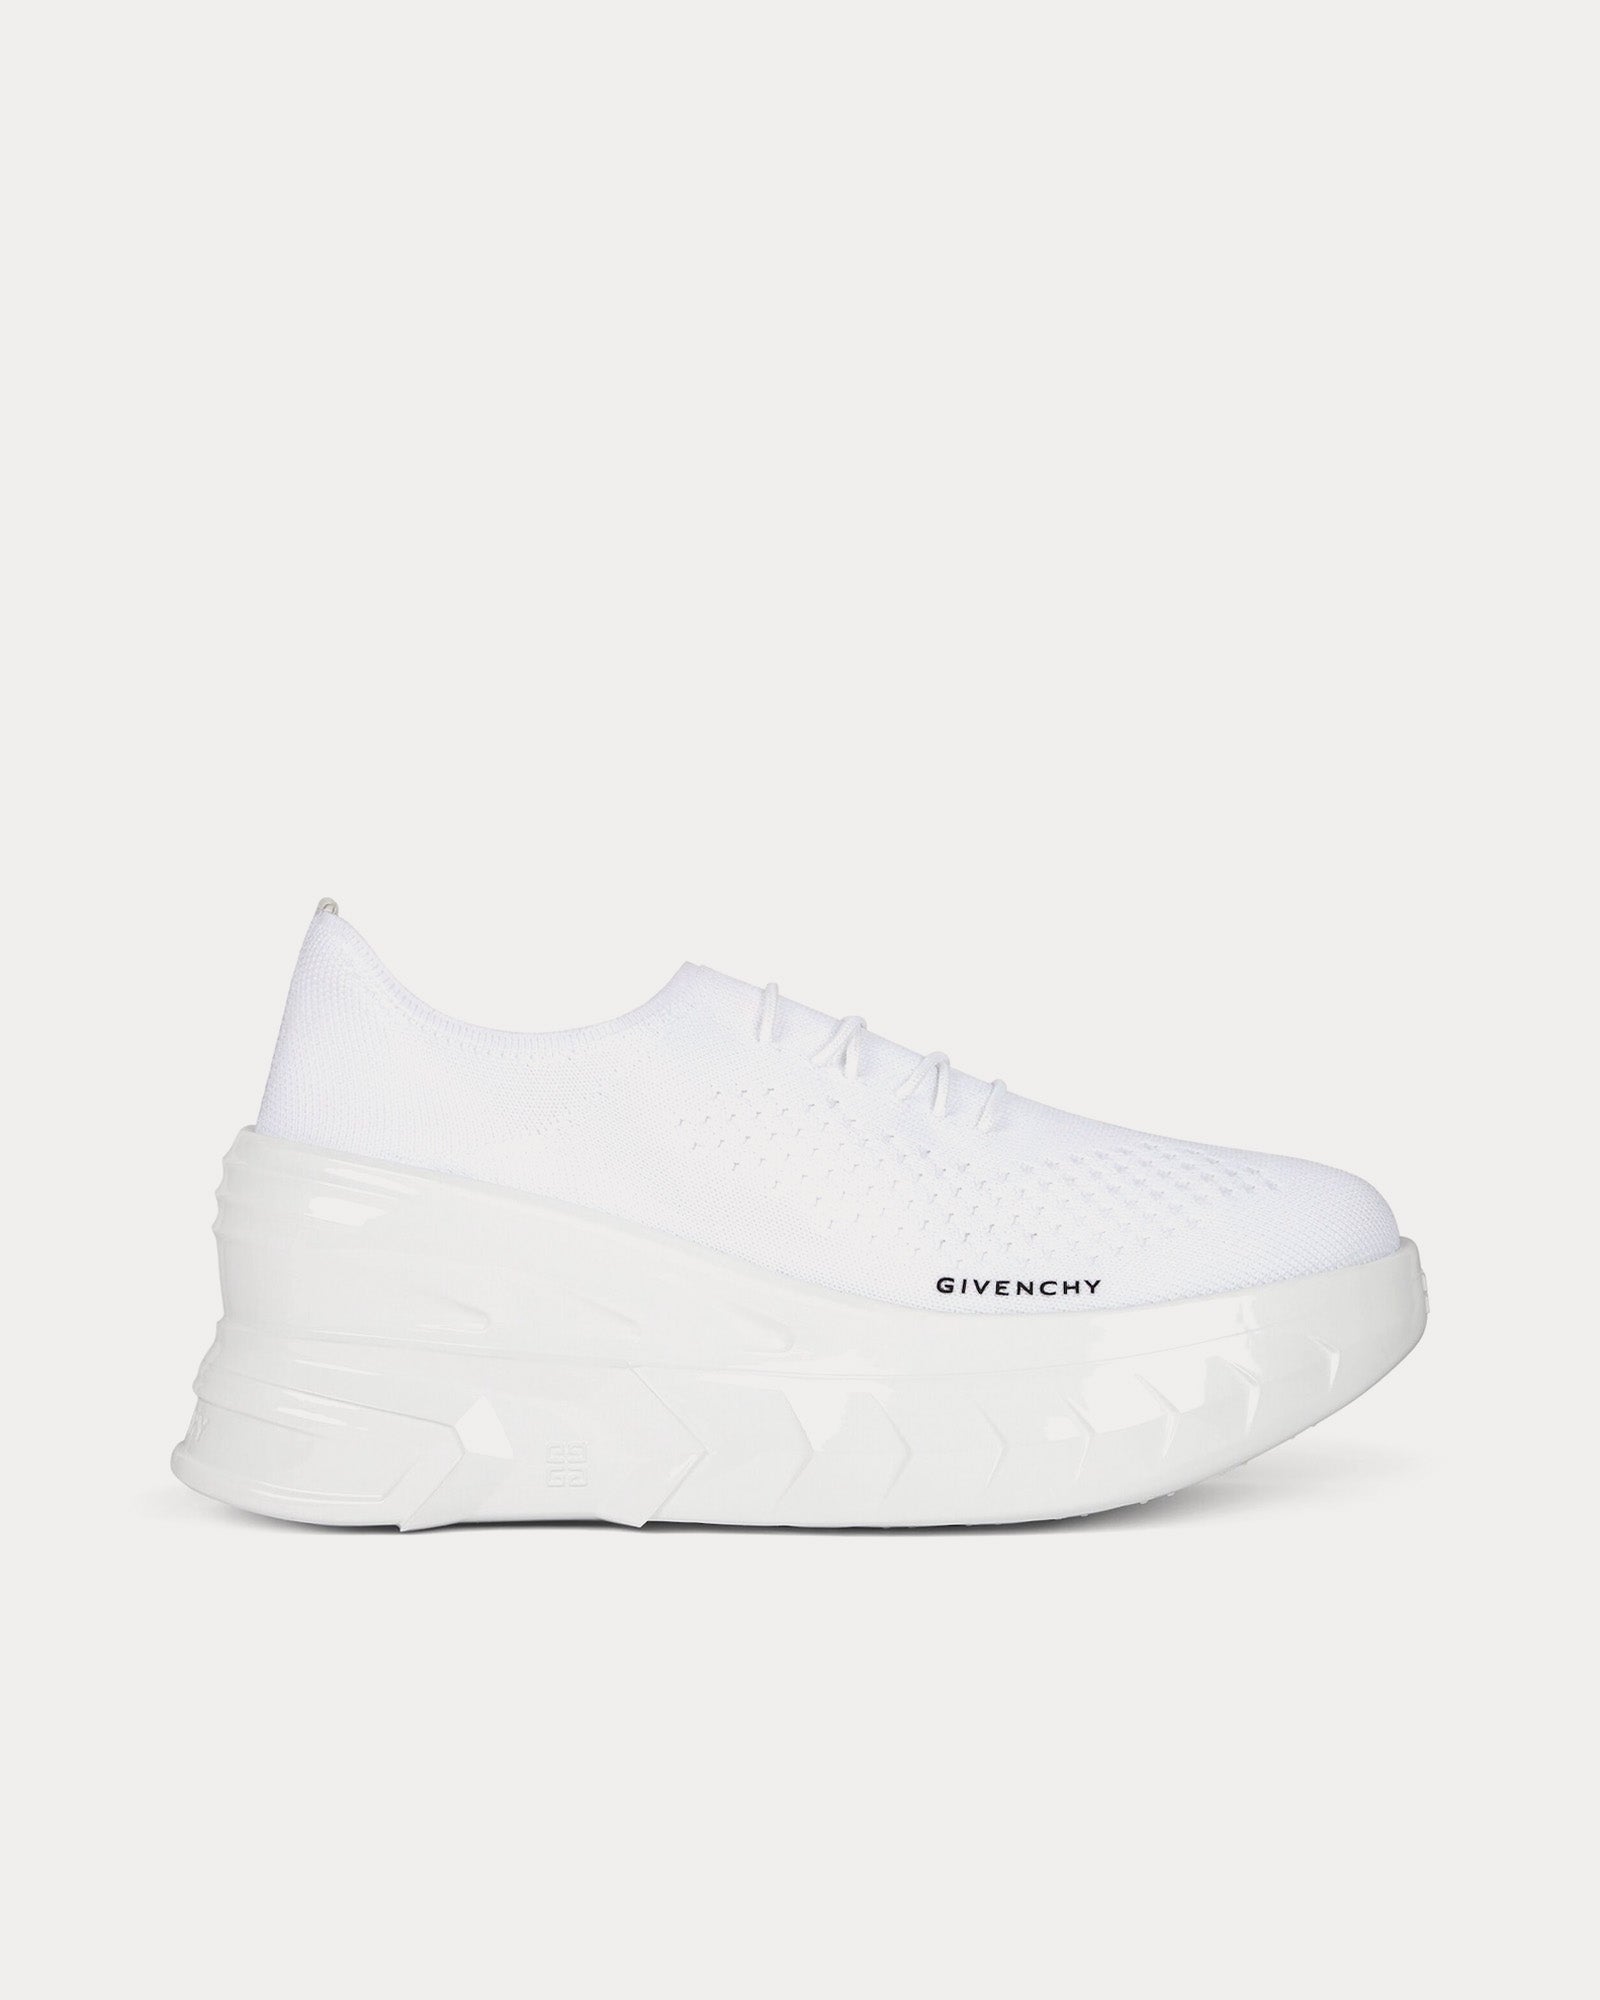 Givenchy - Marshmallow Wedge Rubber & Knit White Low Top Sneakers